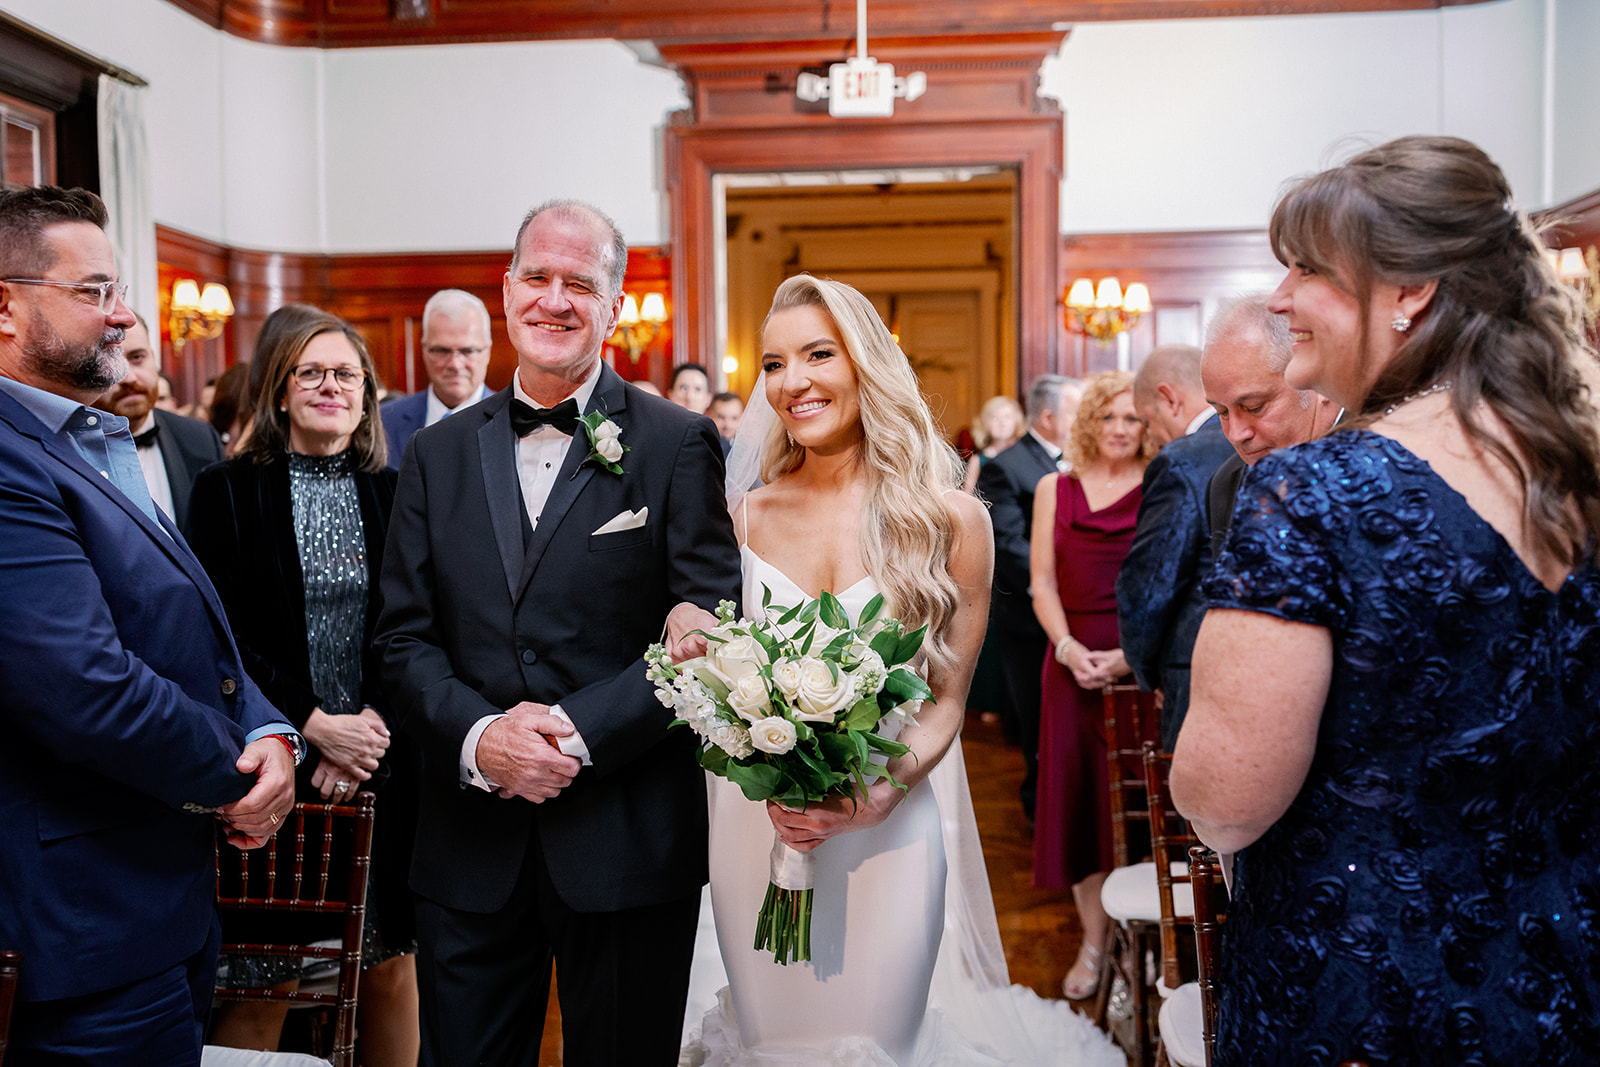 Bride walking down the aisle at her Bourne Mansion indoor wedding ceremony.